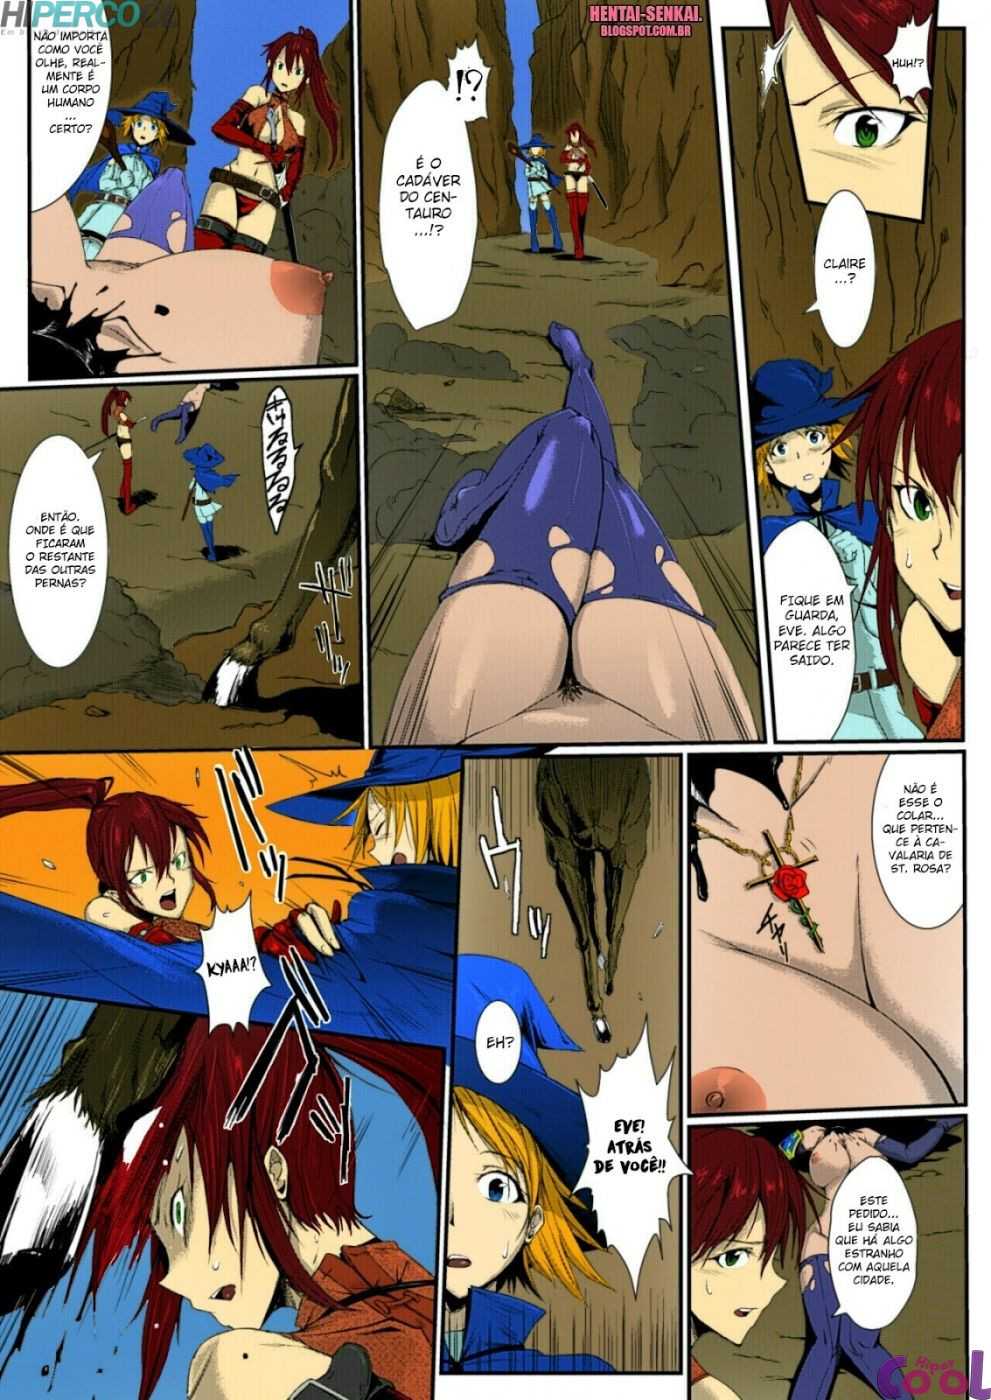 man-eater-colorido-chapter-01-page-03.jpg